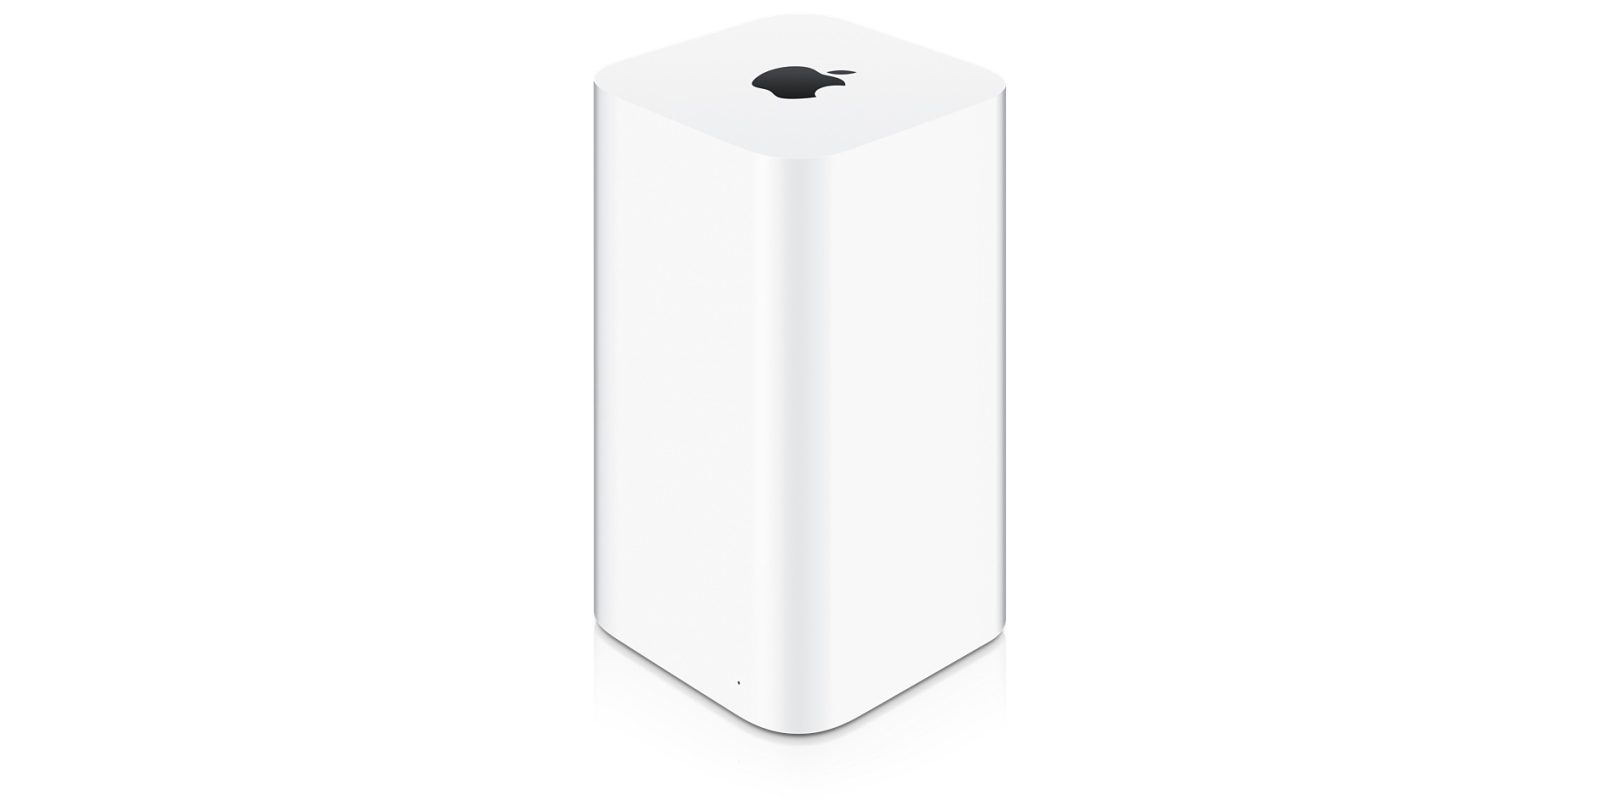 Apple AirPort Extreme - 9to5Mac